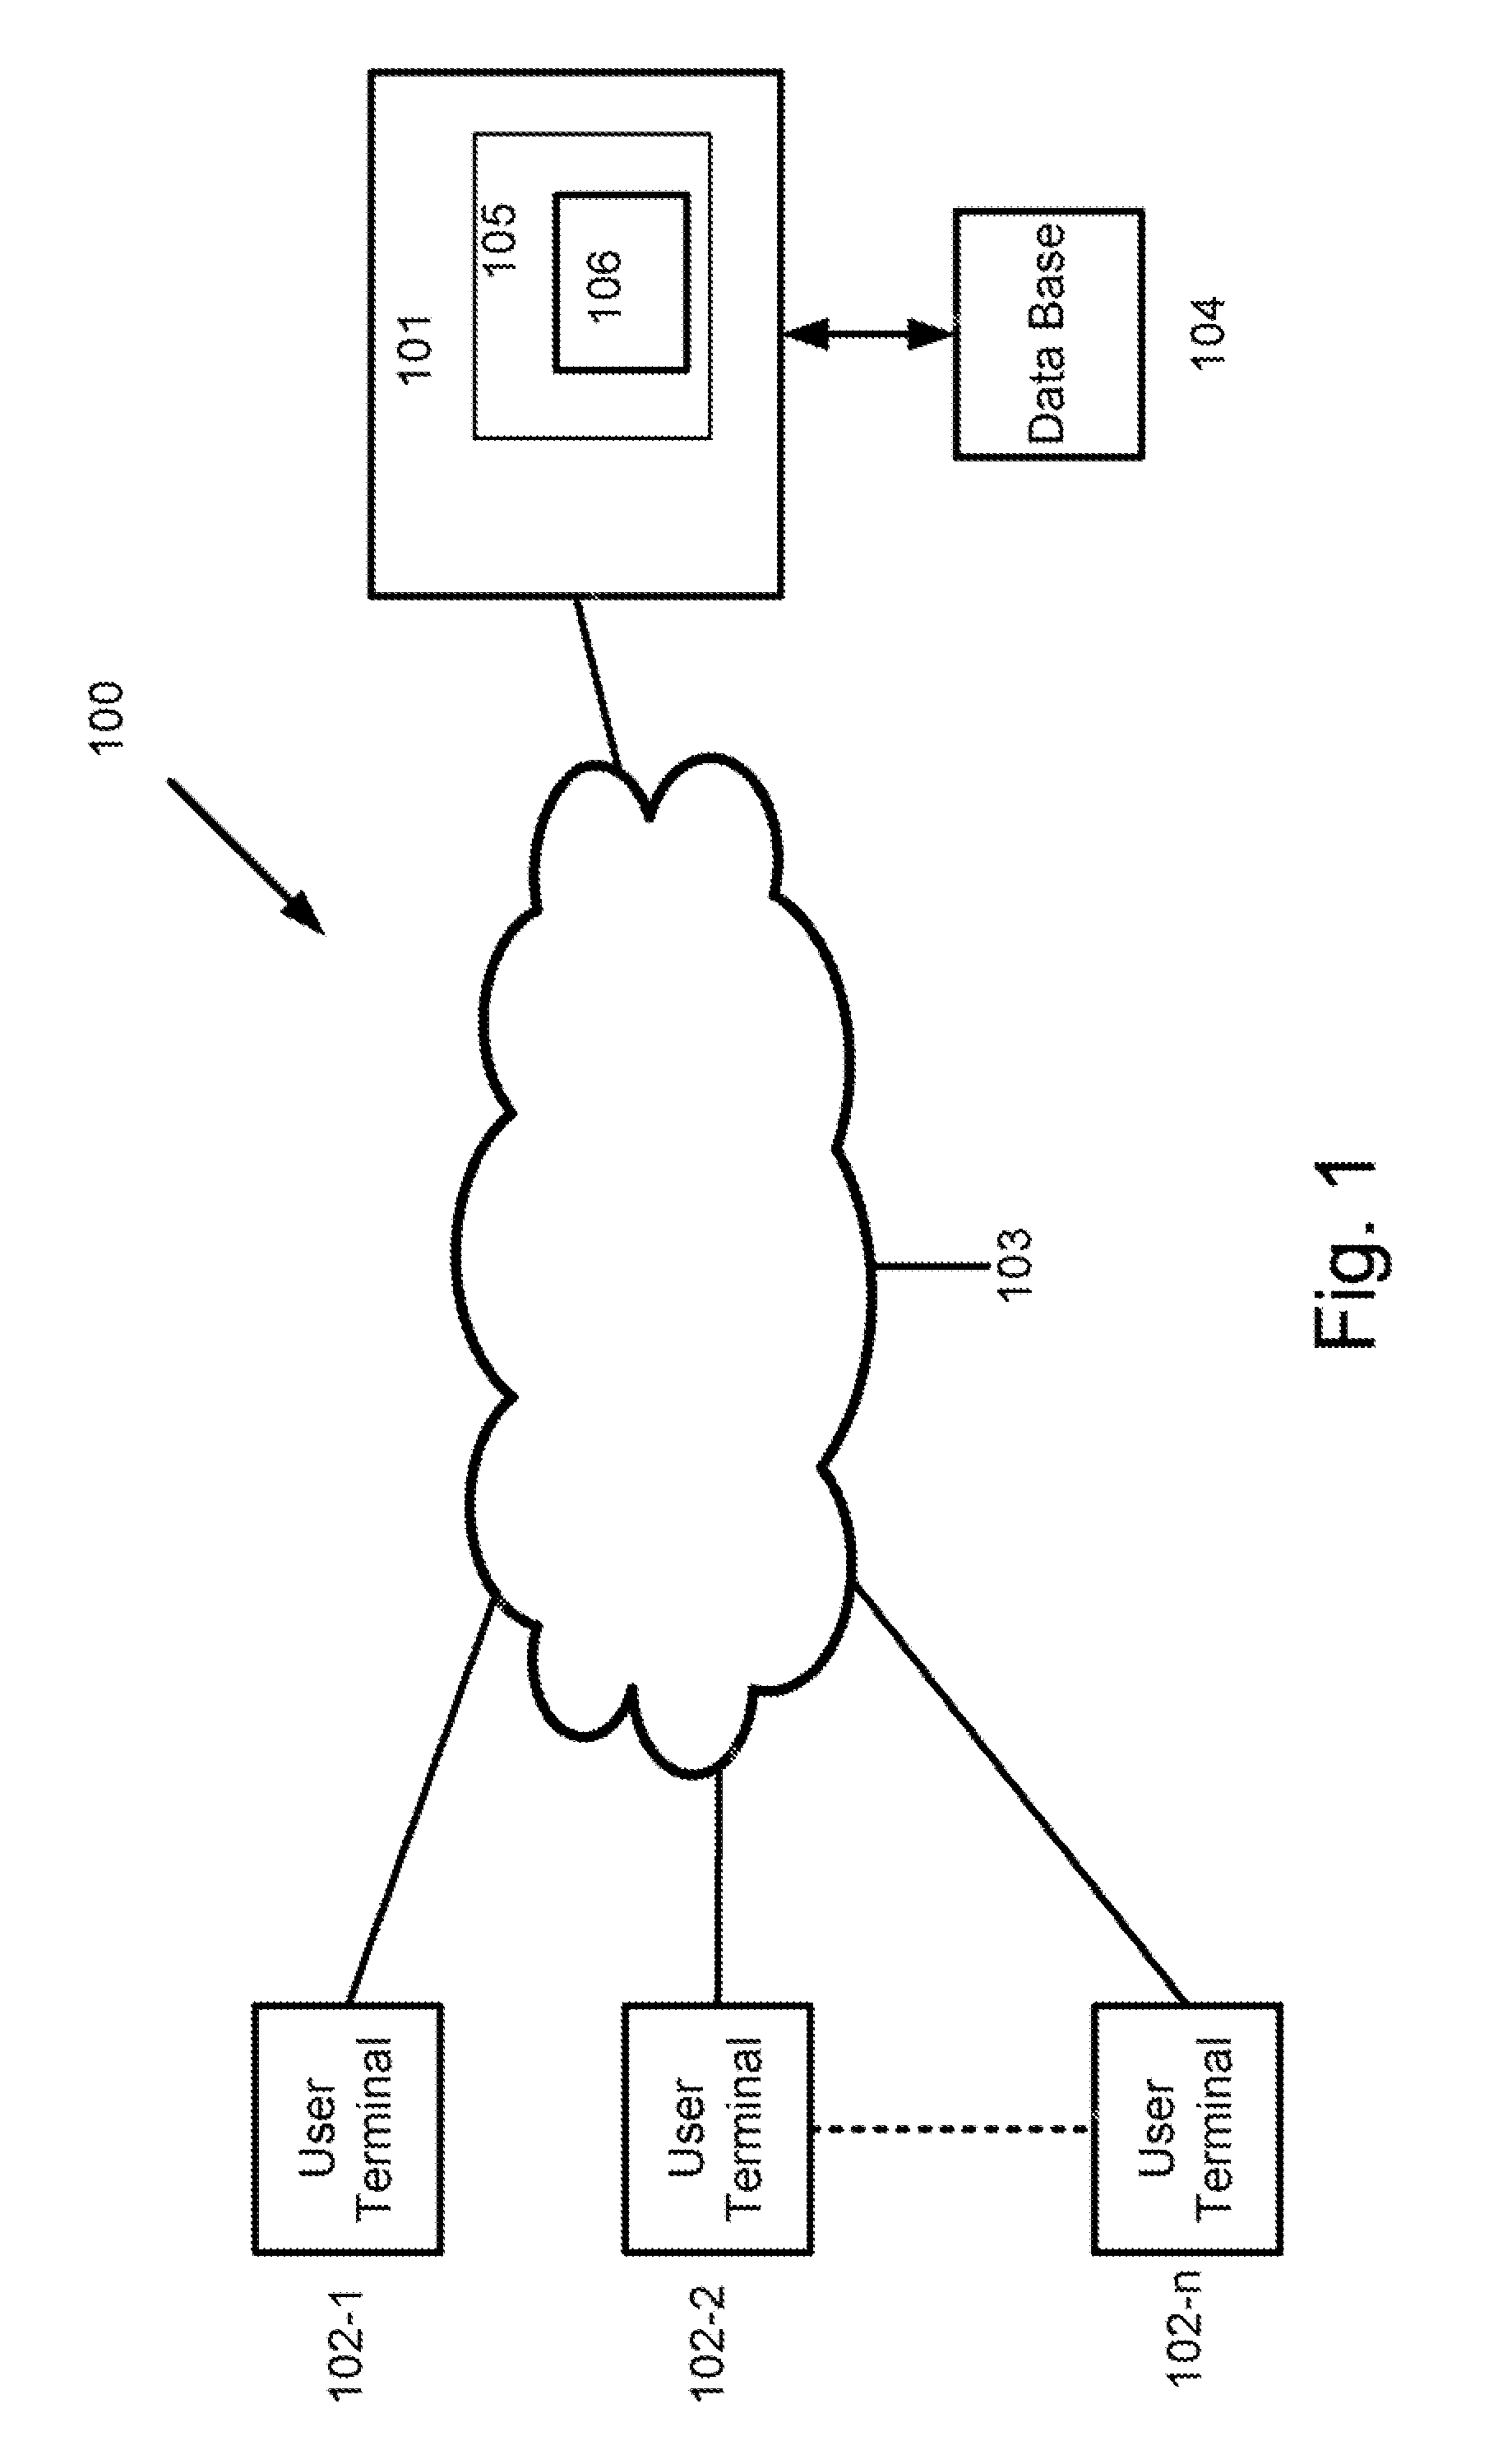 Method and system of facilitating search by color